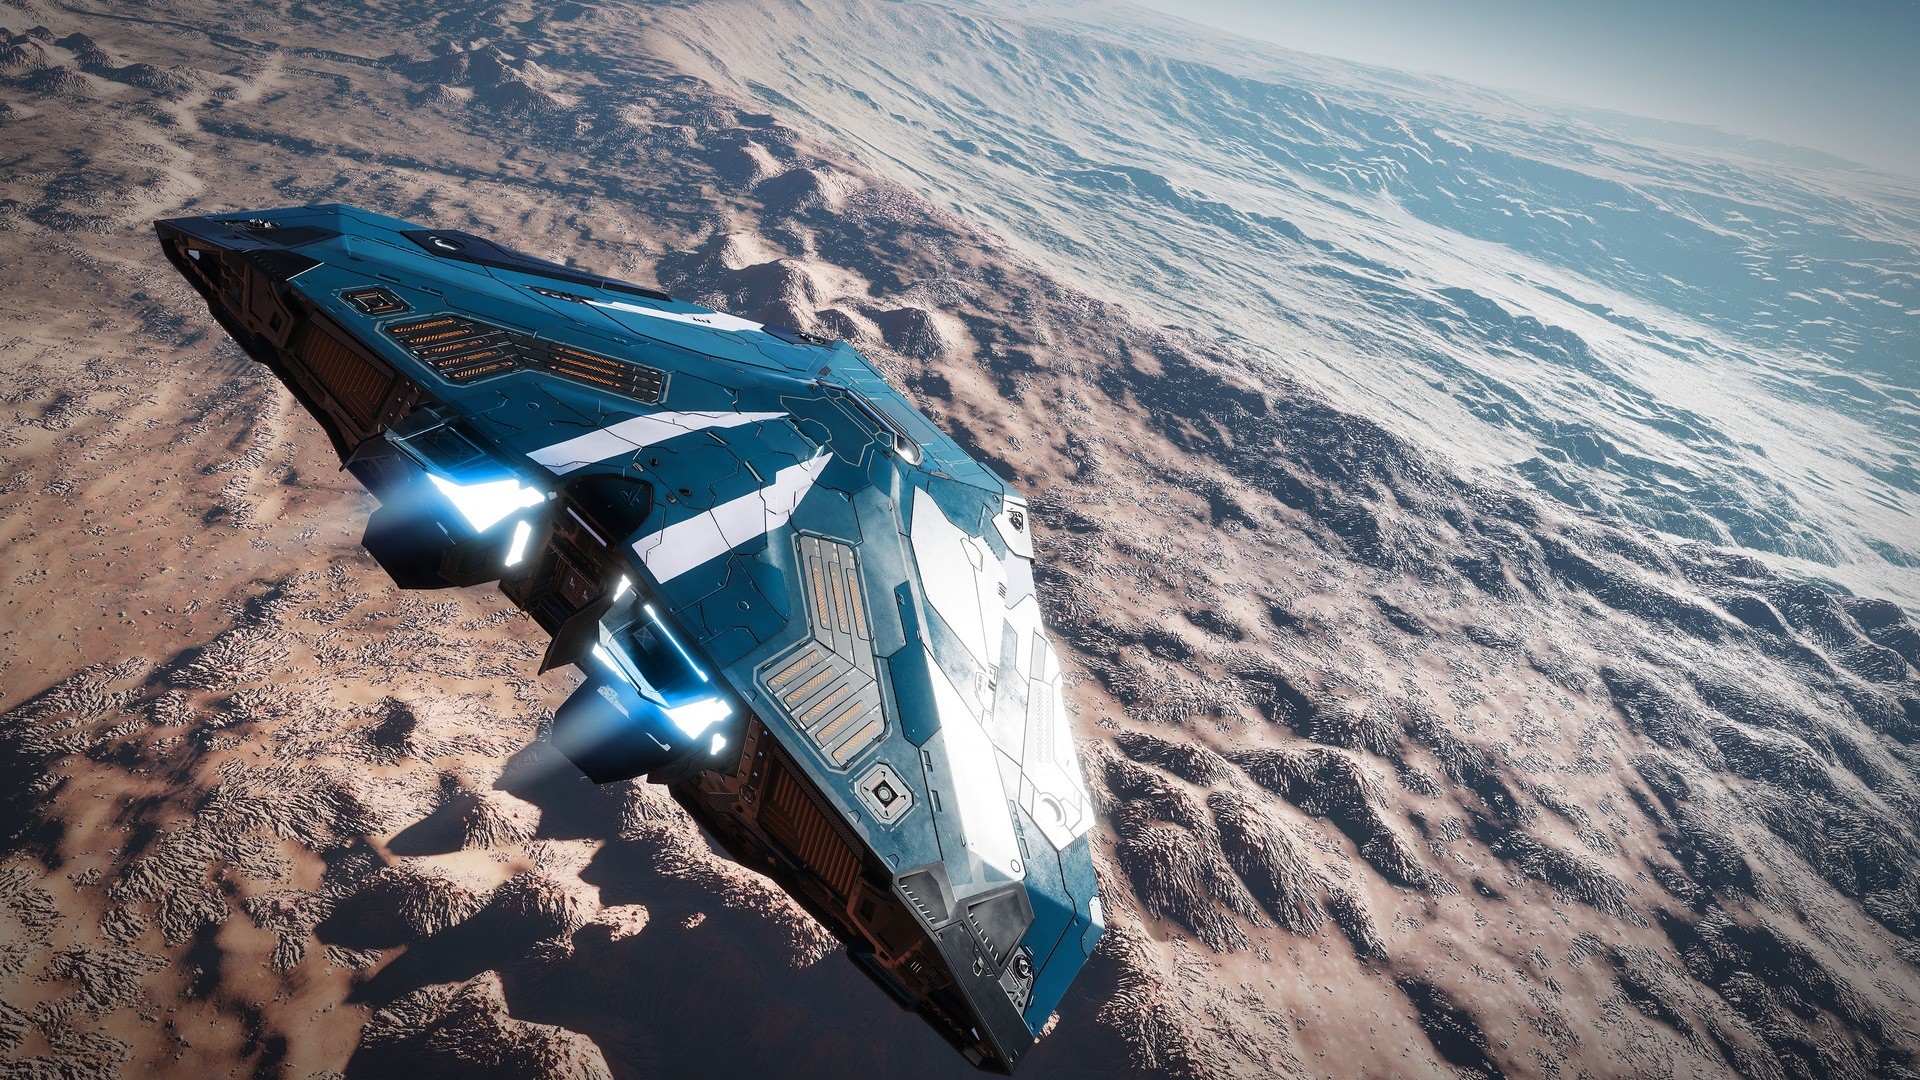 Elite Dangerous: Odyssey’s first major update includes a huge list of fixes